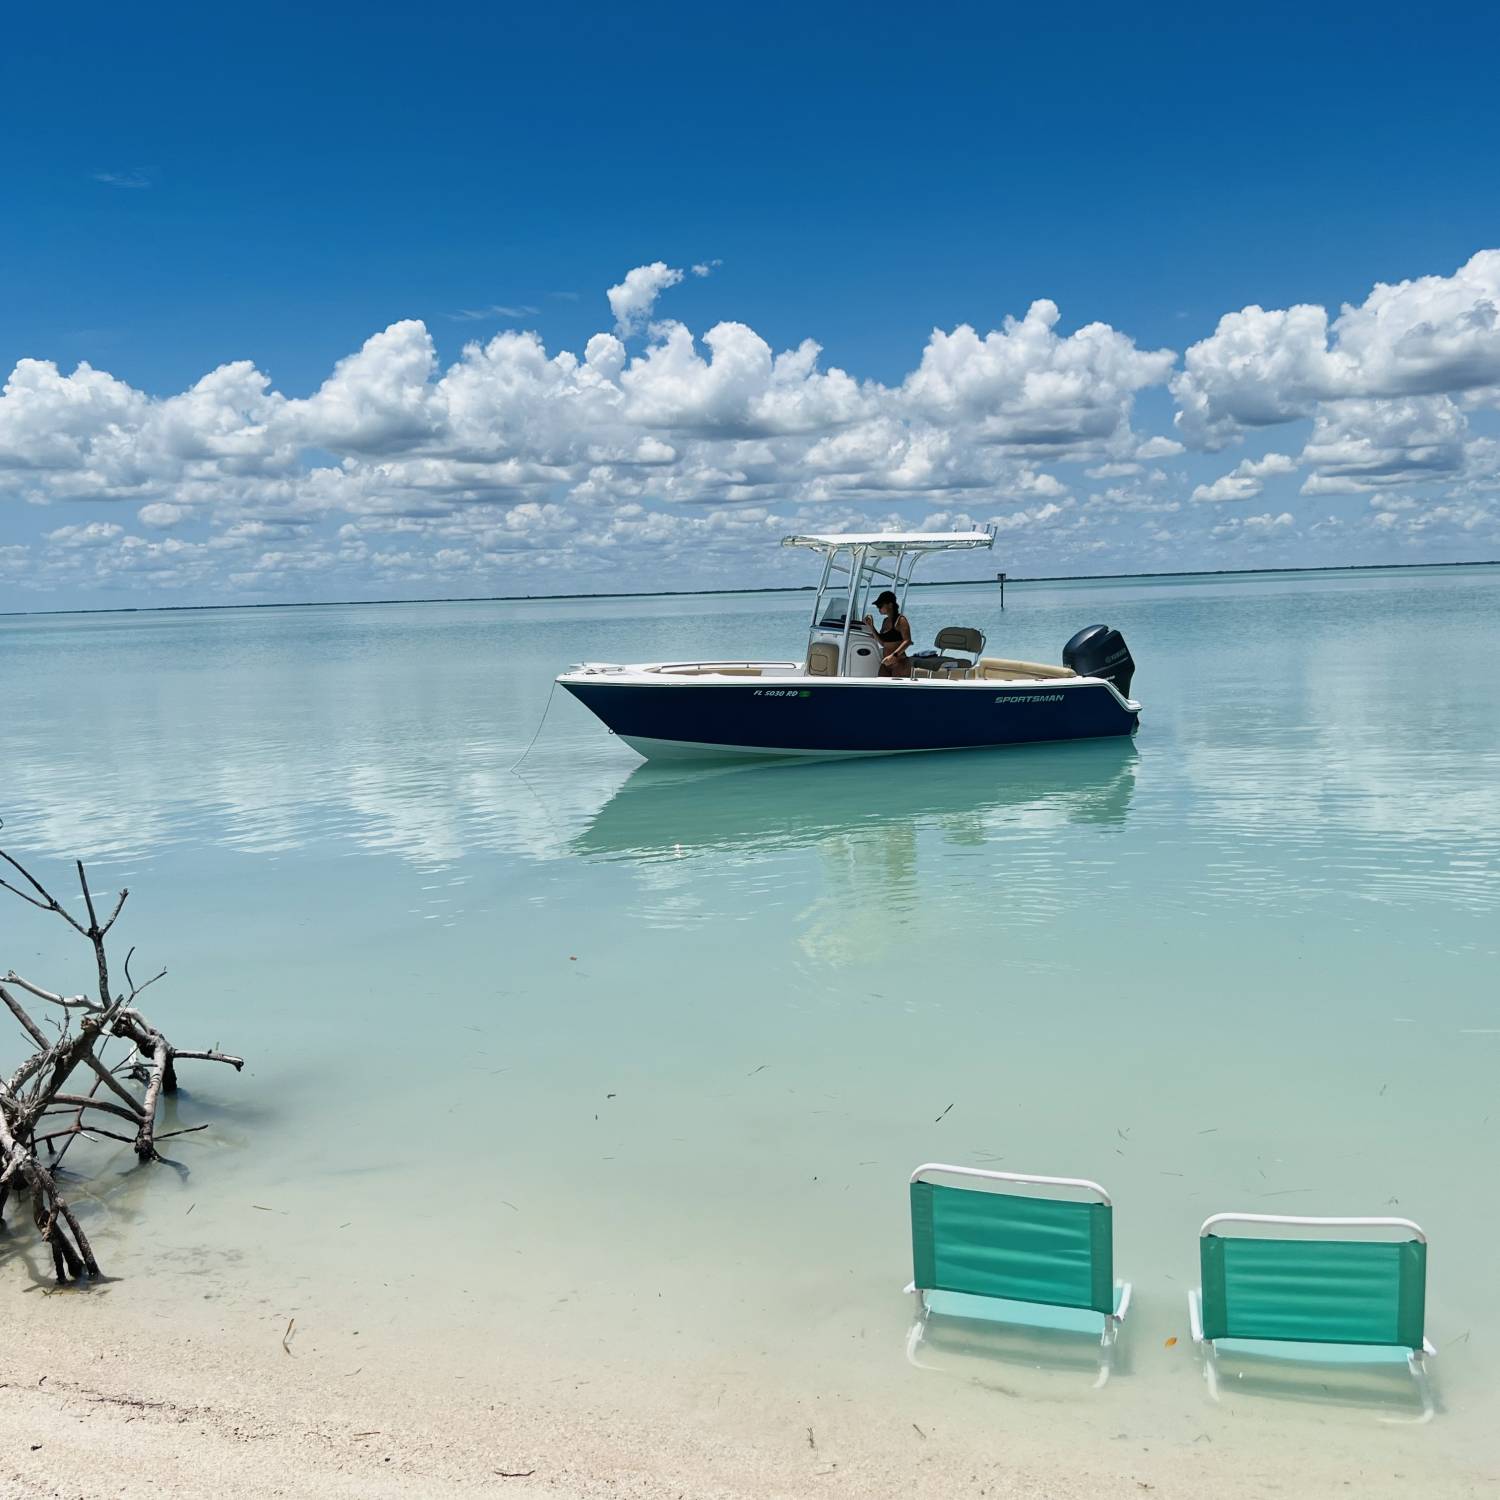 Photo was taken in Nest Key, Key Largo. 2014 sportsman 211 heritage in the background in the calm waters of...